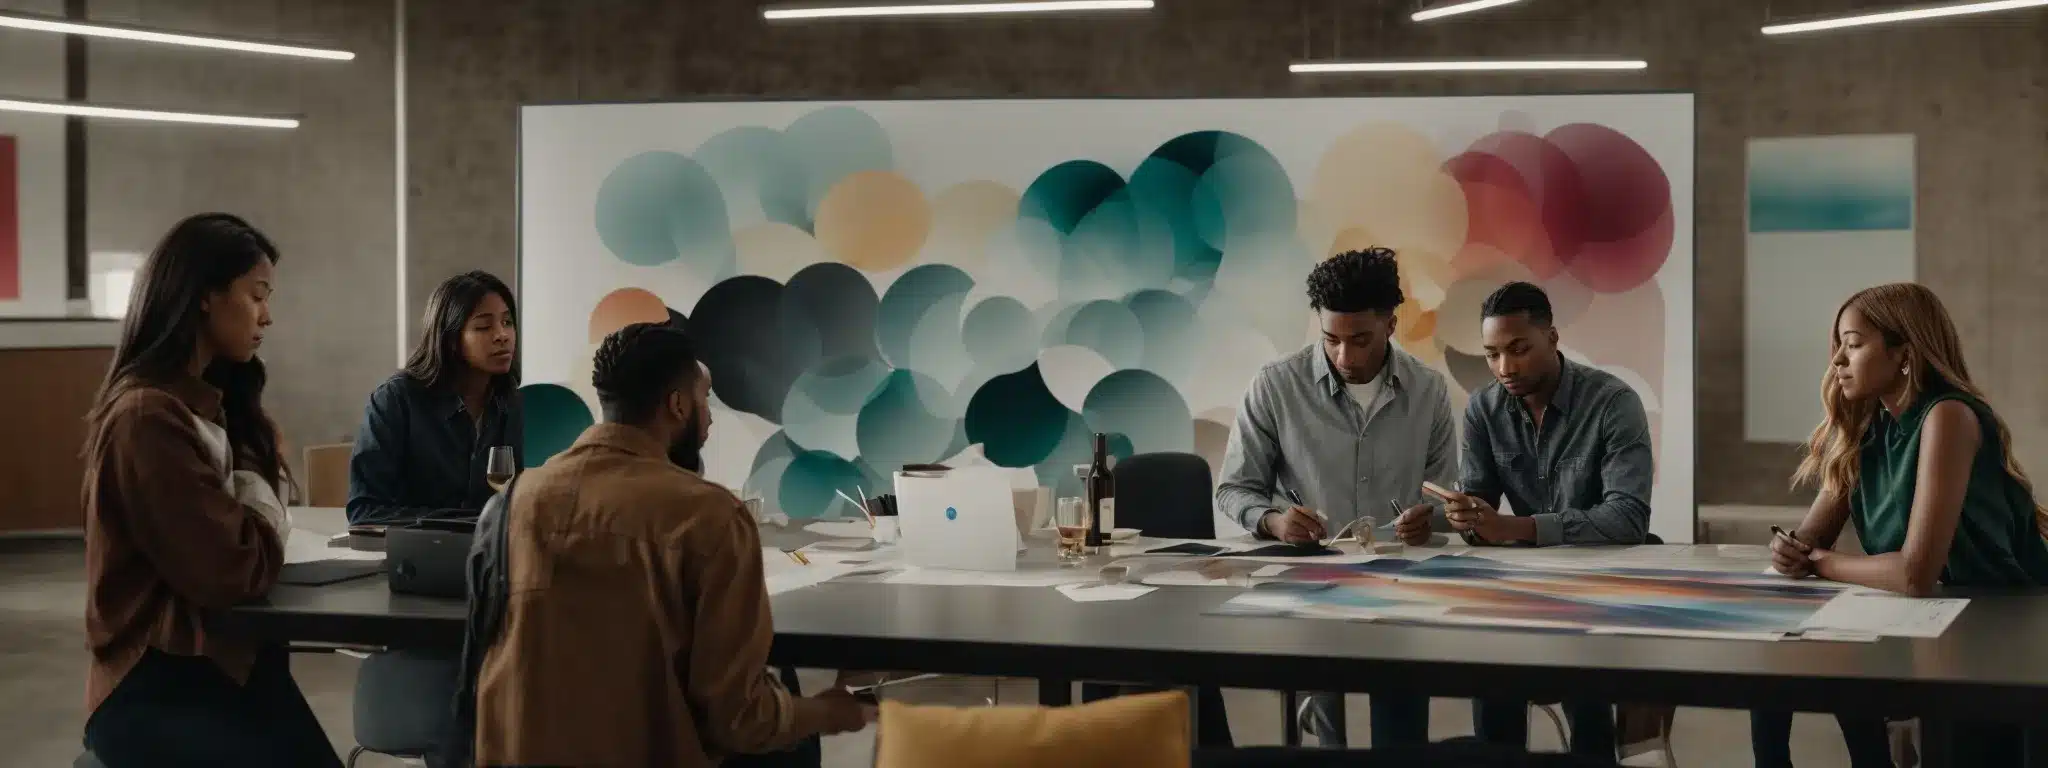 A Creative Team Collaborates Around A Sleek Table, Discussing Color Palettes And Logo Sketches Displayed On Large, Vibrant Posters.